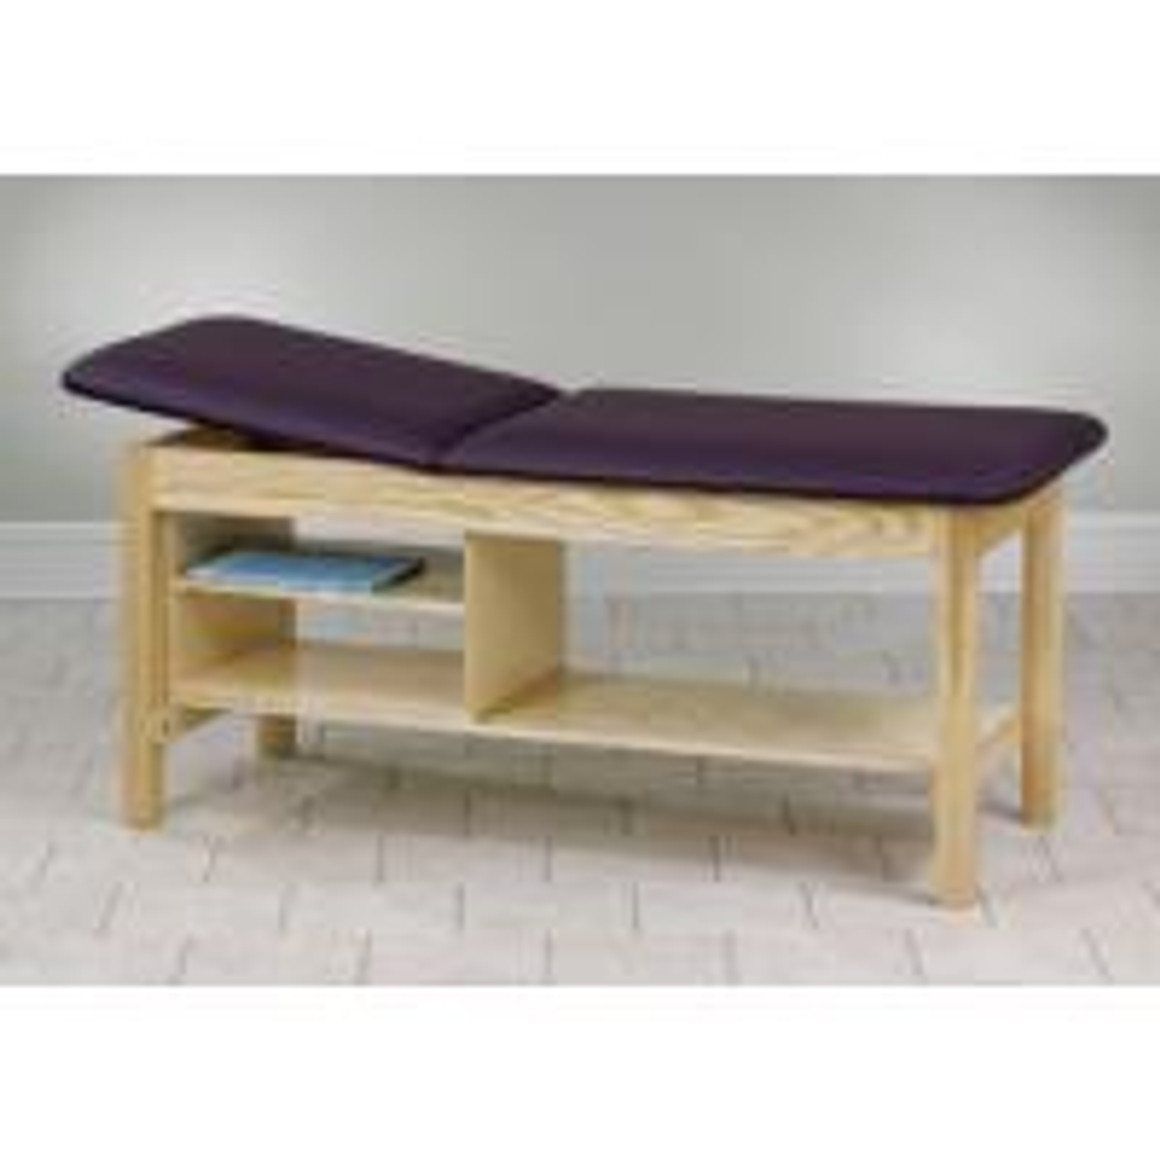 Clinton Classic Series Straight Line Treatment Table with Shelving Unit, 30" Wide, Sapphire